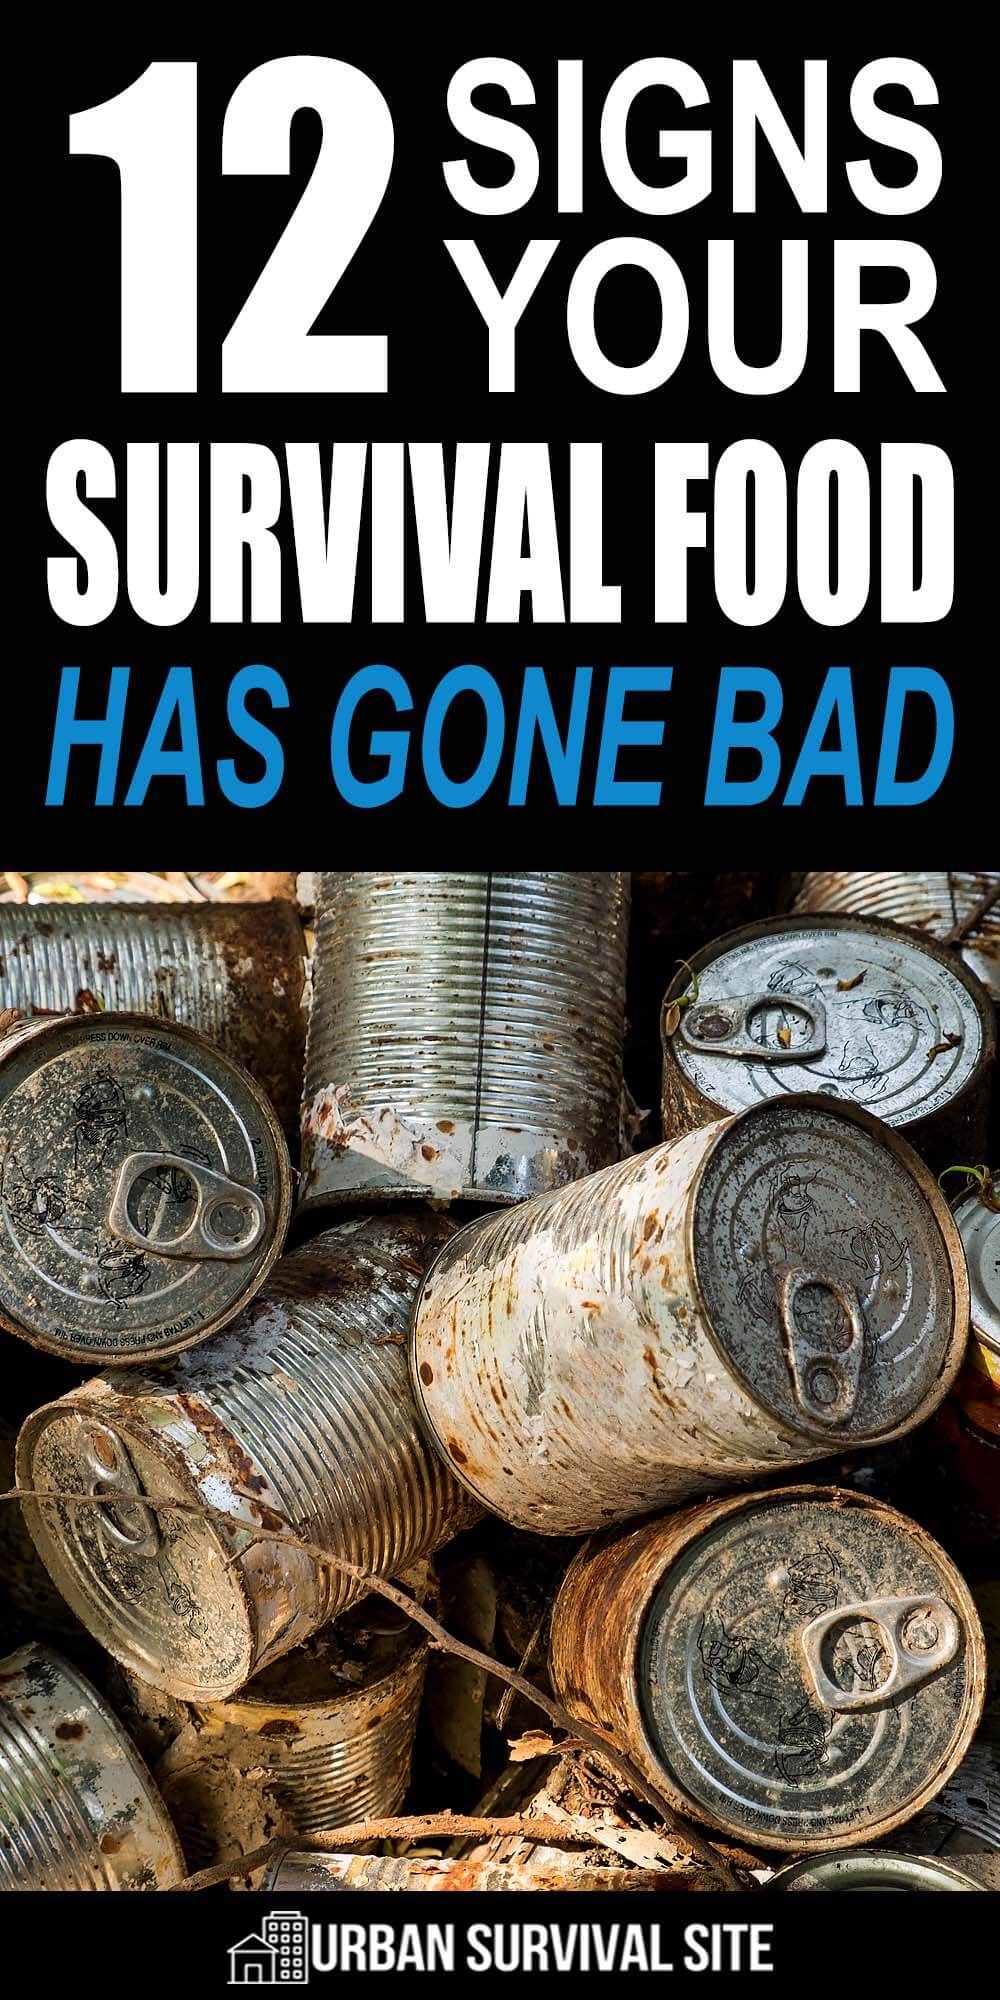 12 Signs Your Survival Food Has Gone Bad